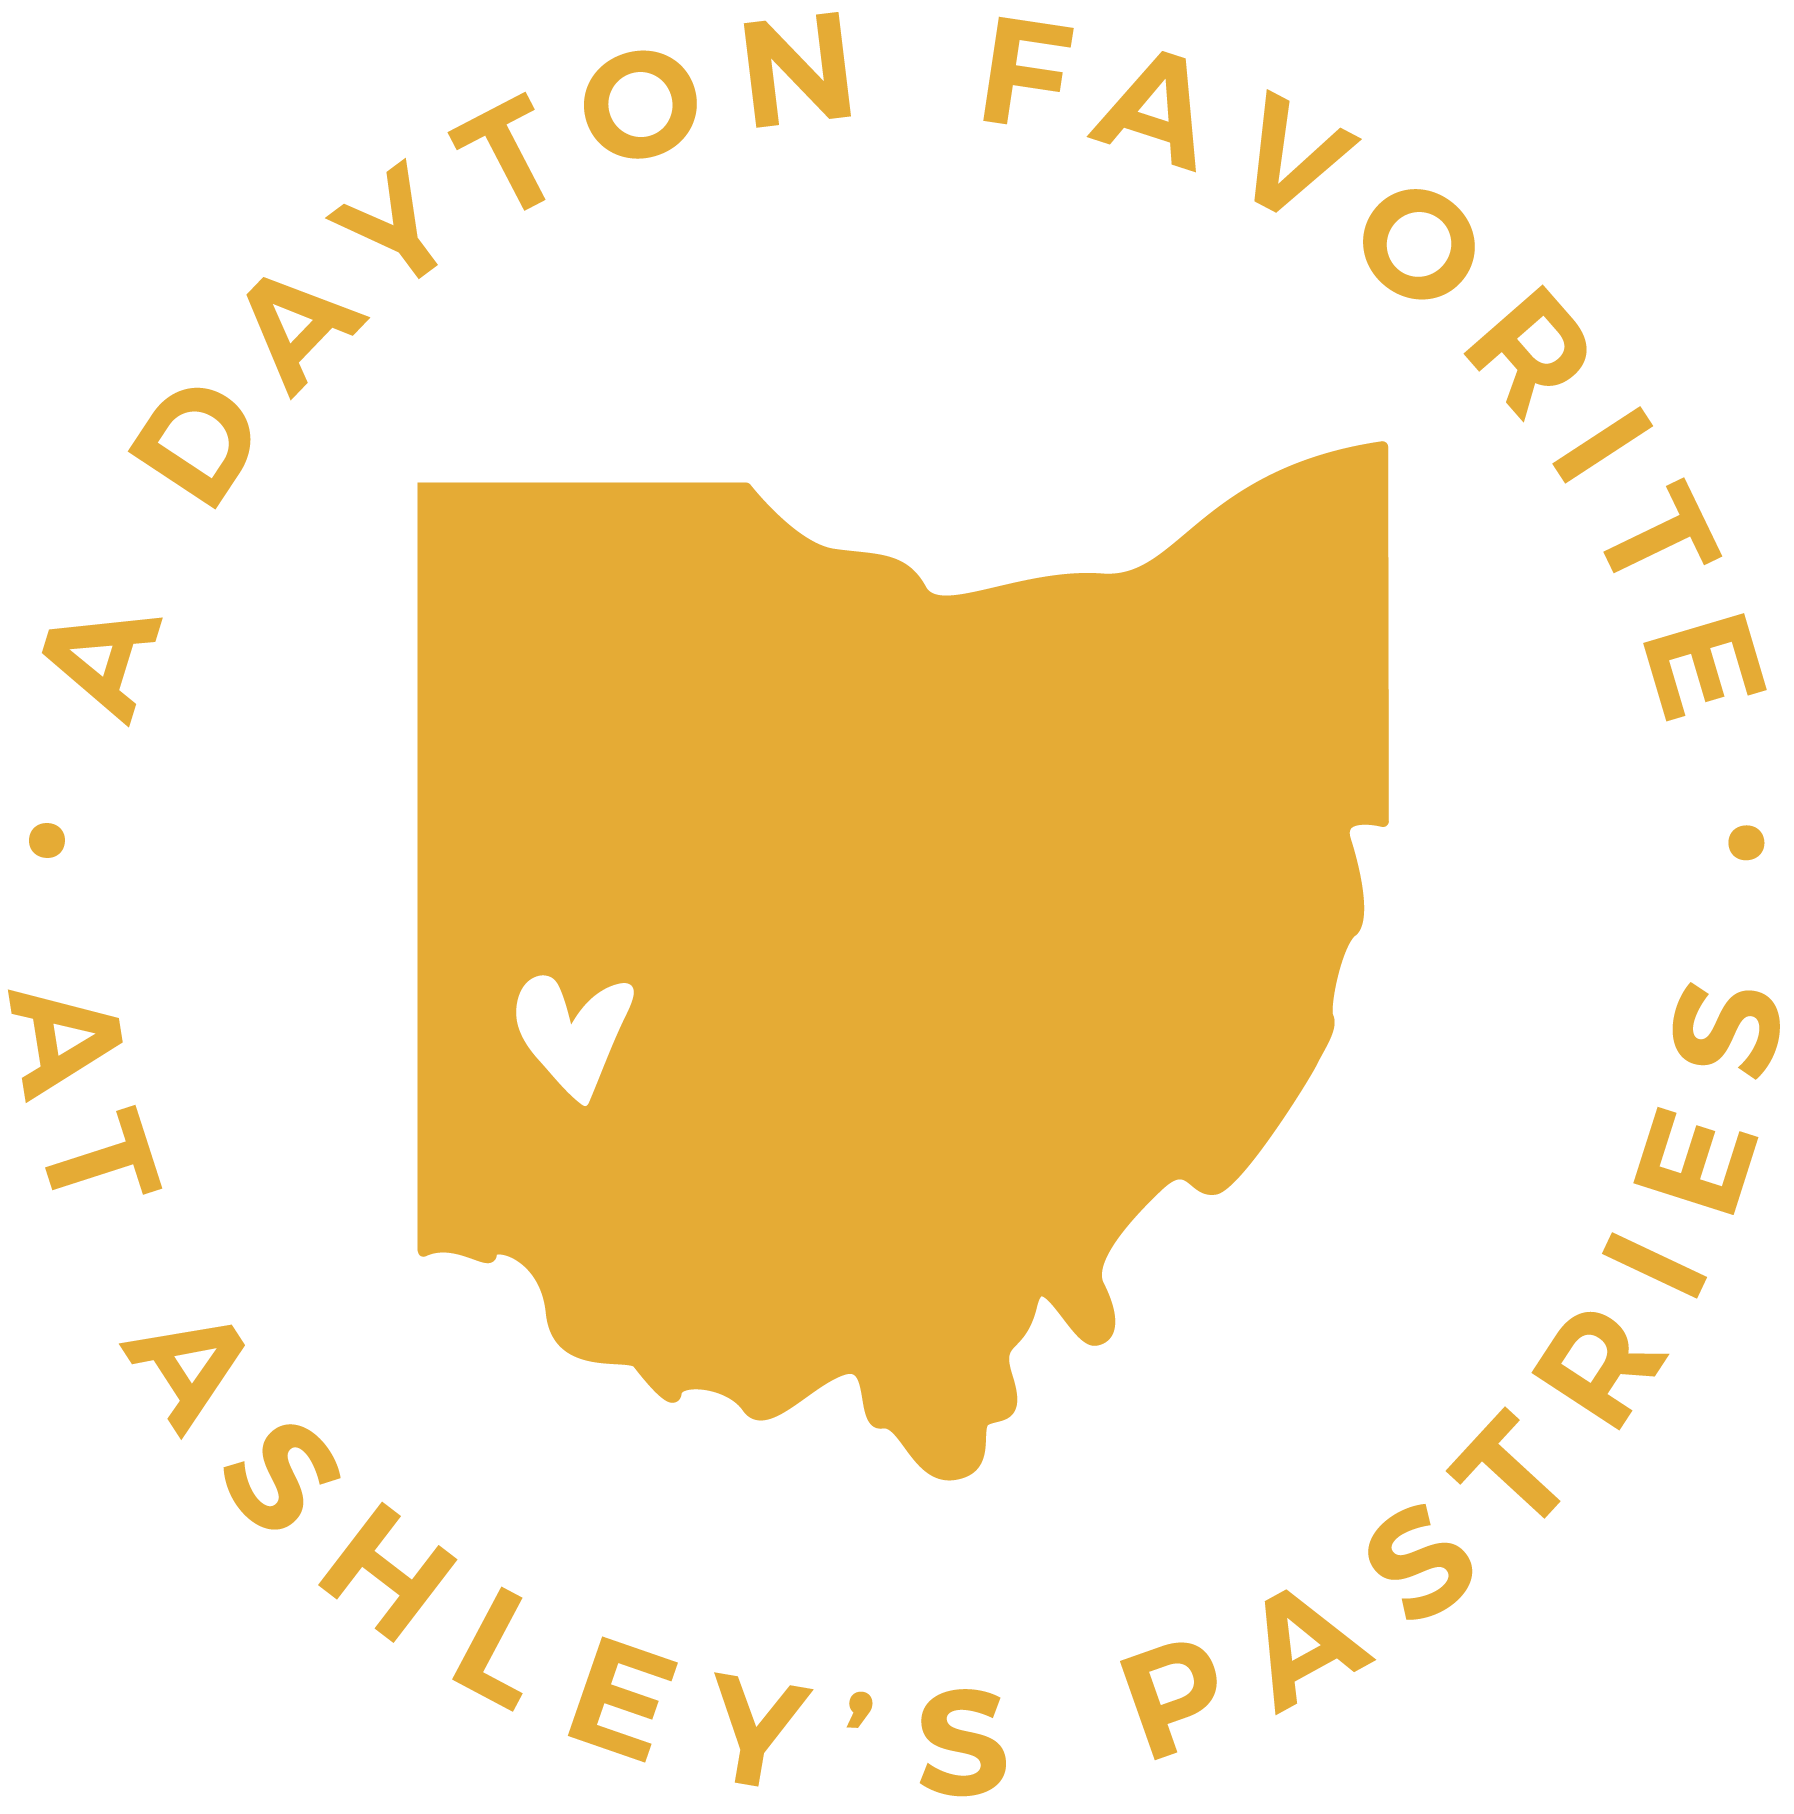 Yellow outline of Ohio with a heart shape inside, surrounded by the text "A Dayton Favorite at Ashley's Pastries. Delight in our delicious cookies!